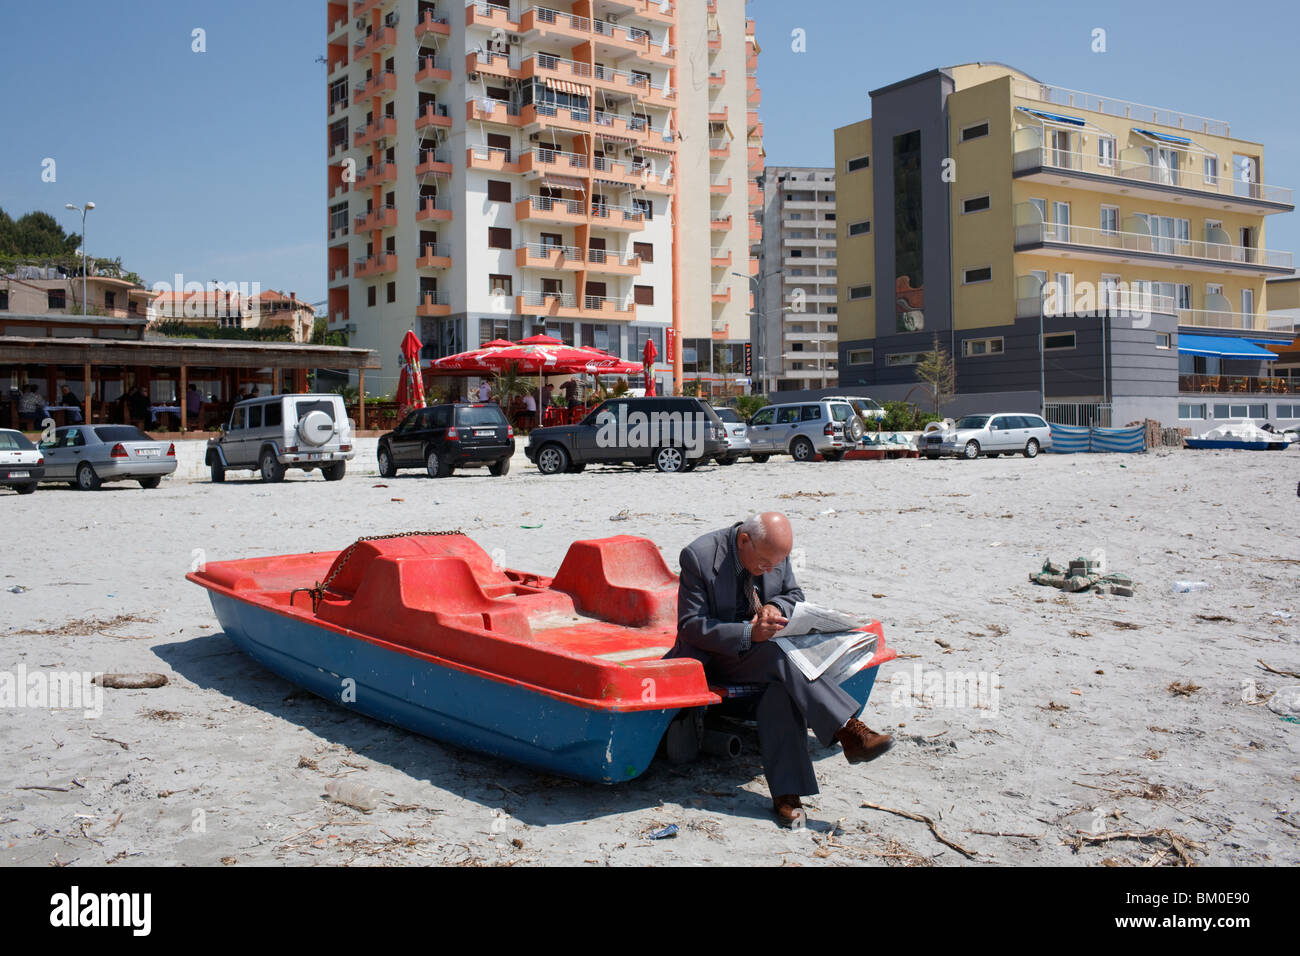 An old man reads newspaper on the beach in Durres, Albania. Stock Photo